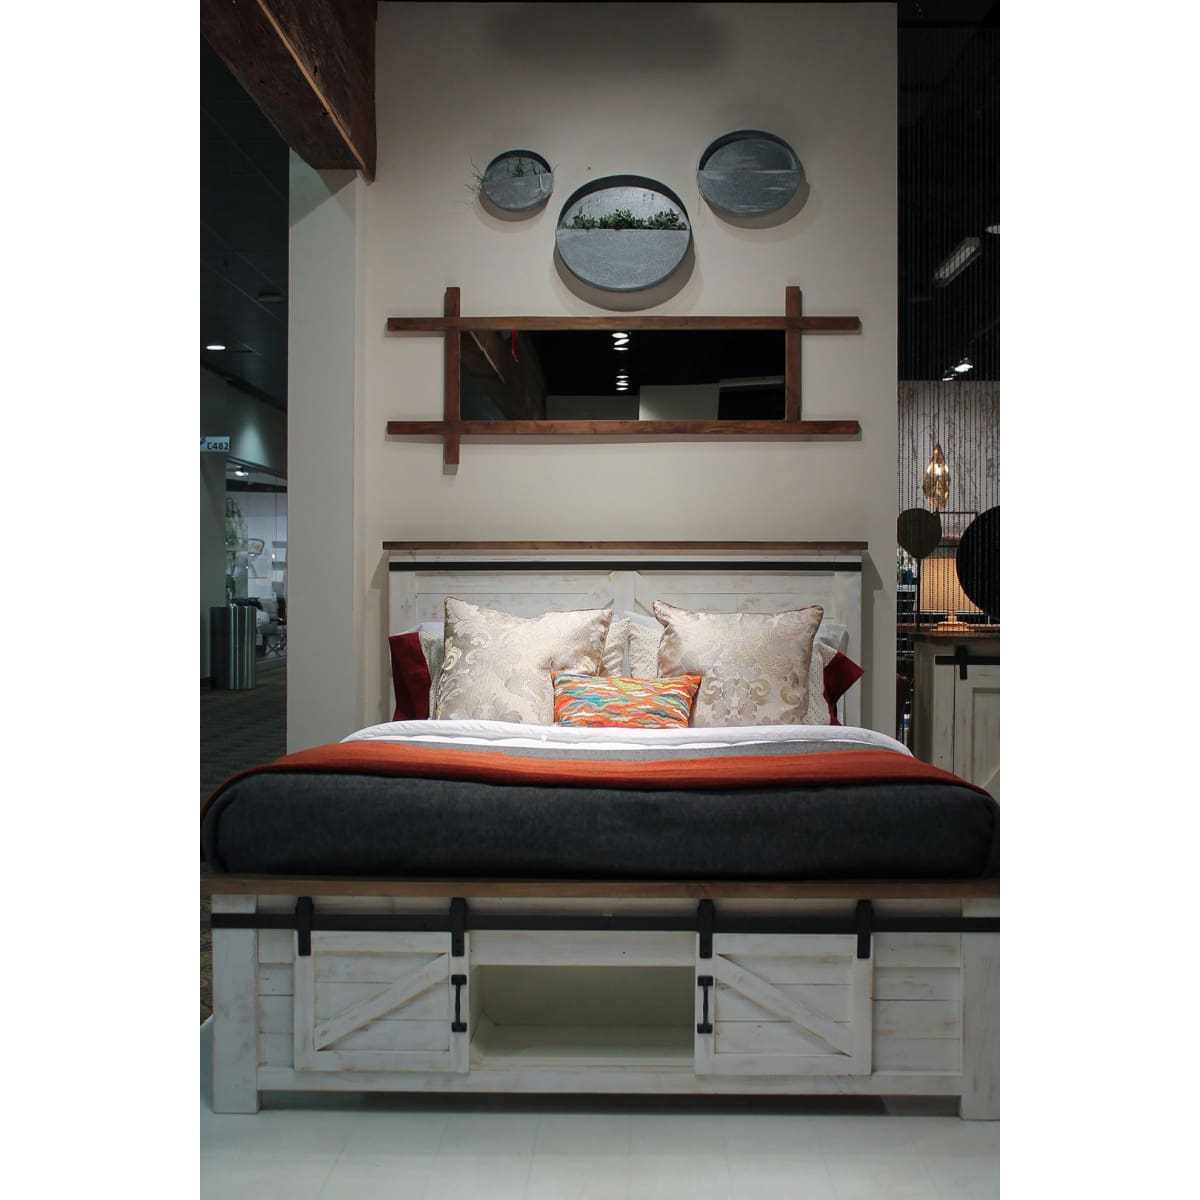 Provence King Bed - lh-import-beds